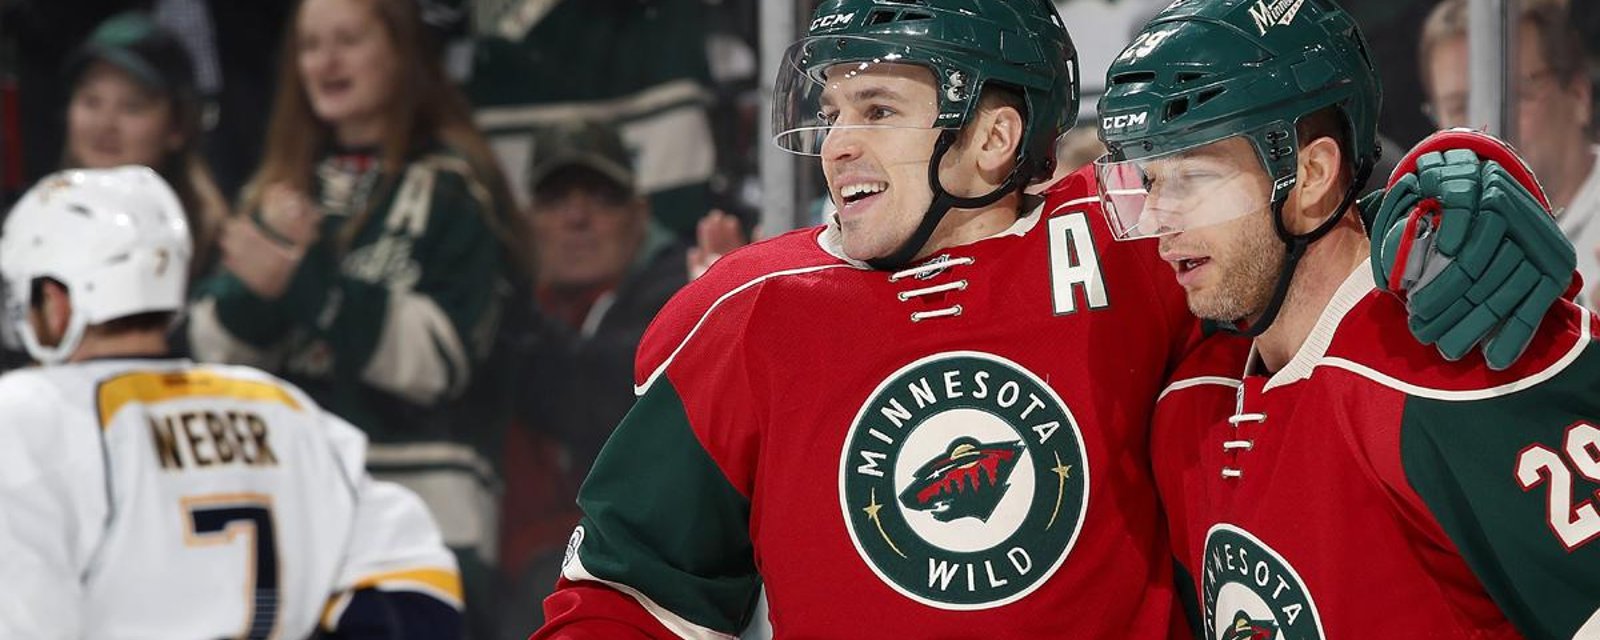 Zach Parise makes egotistic move, exposes player who gave it all. 